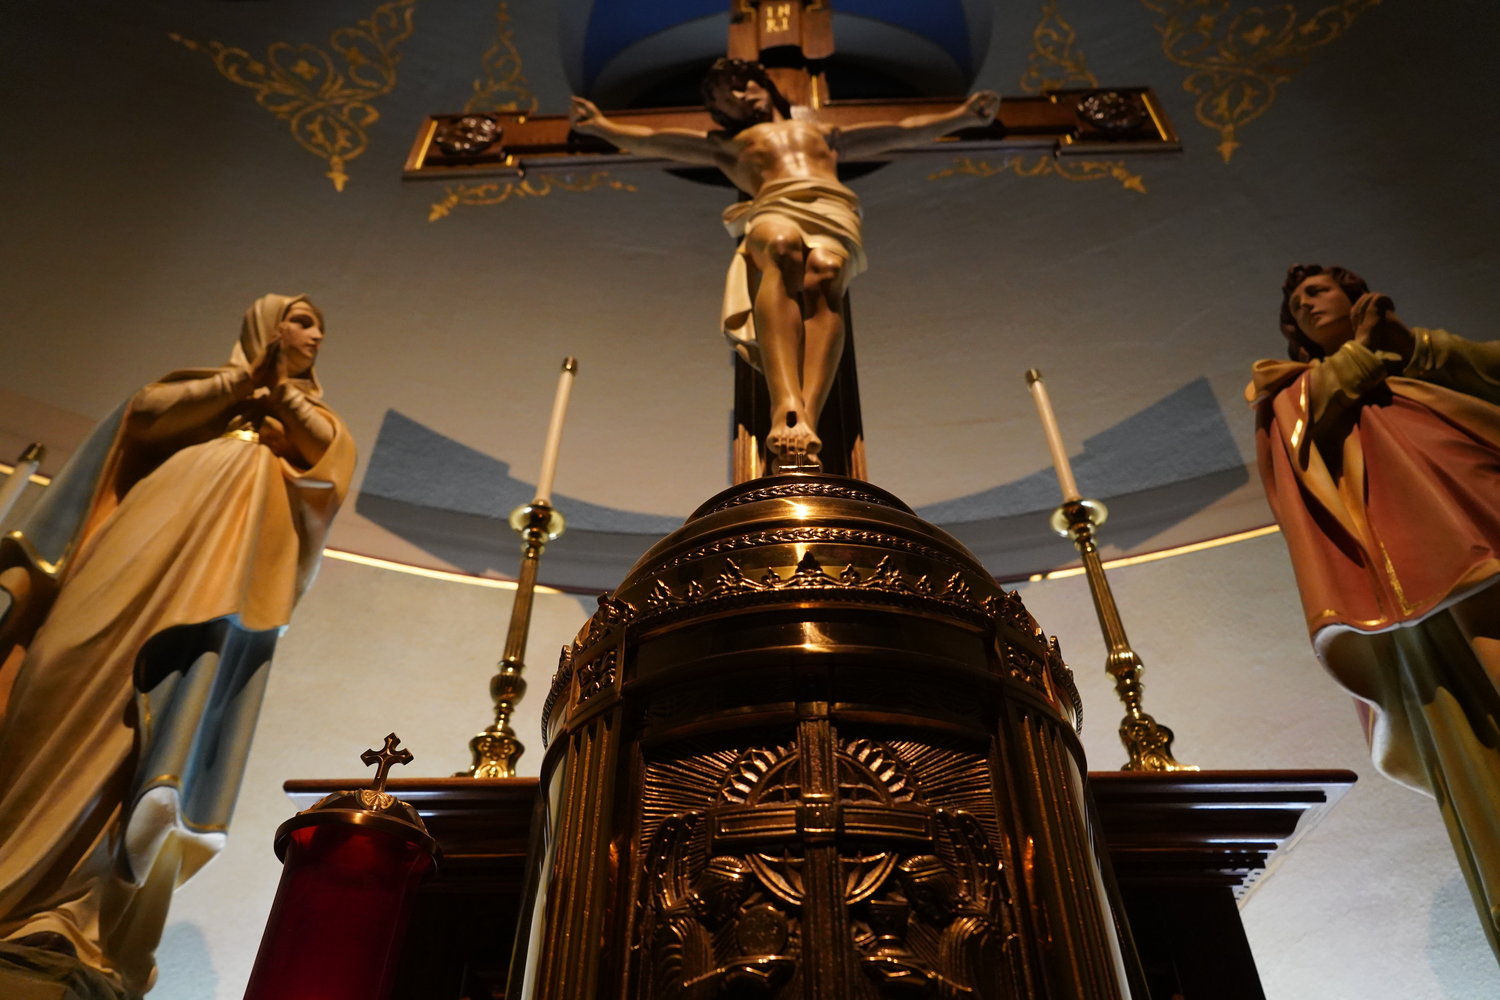 Tabernacle and crucifix, Immaculate Conception Church, Jefferson City, at night